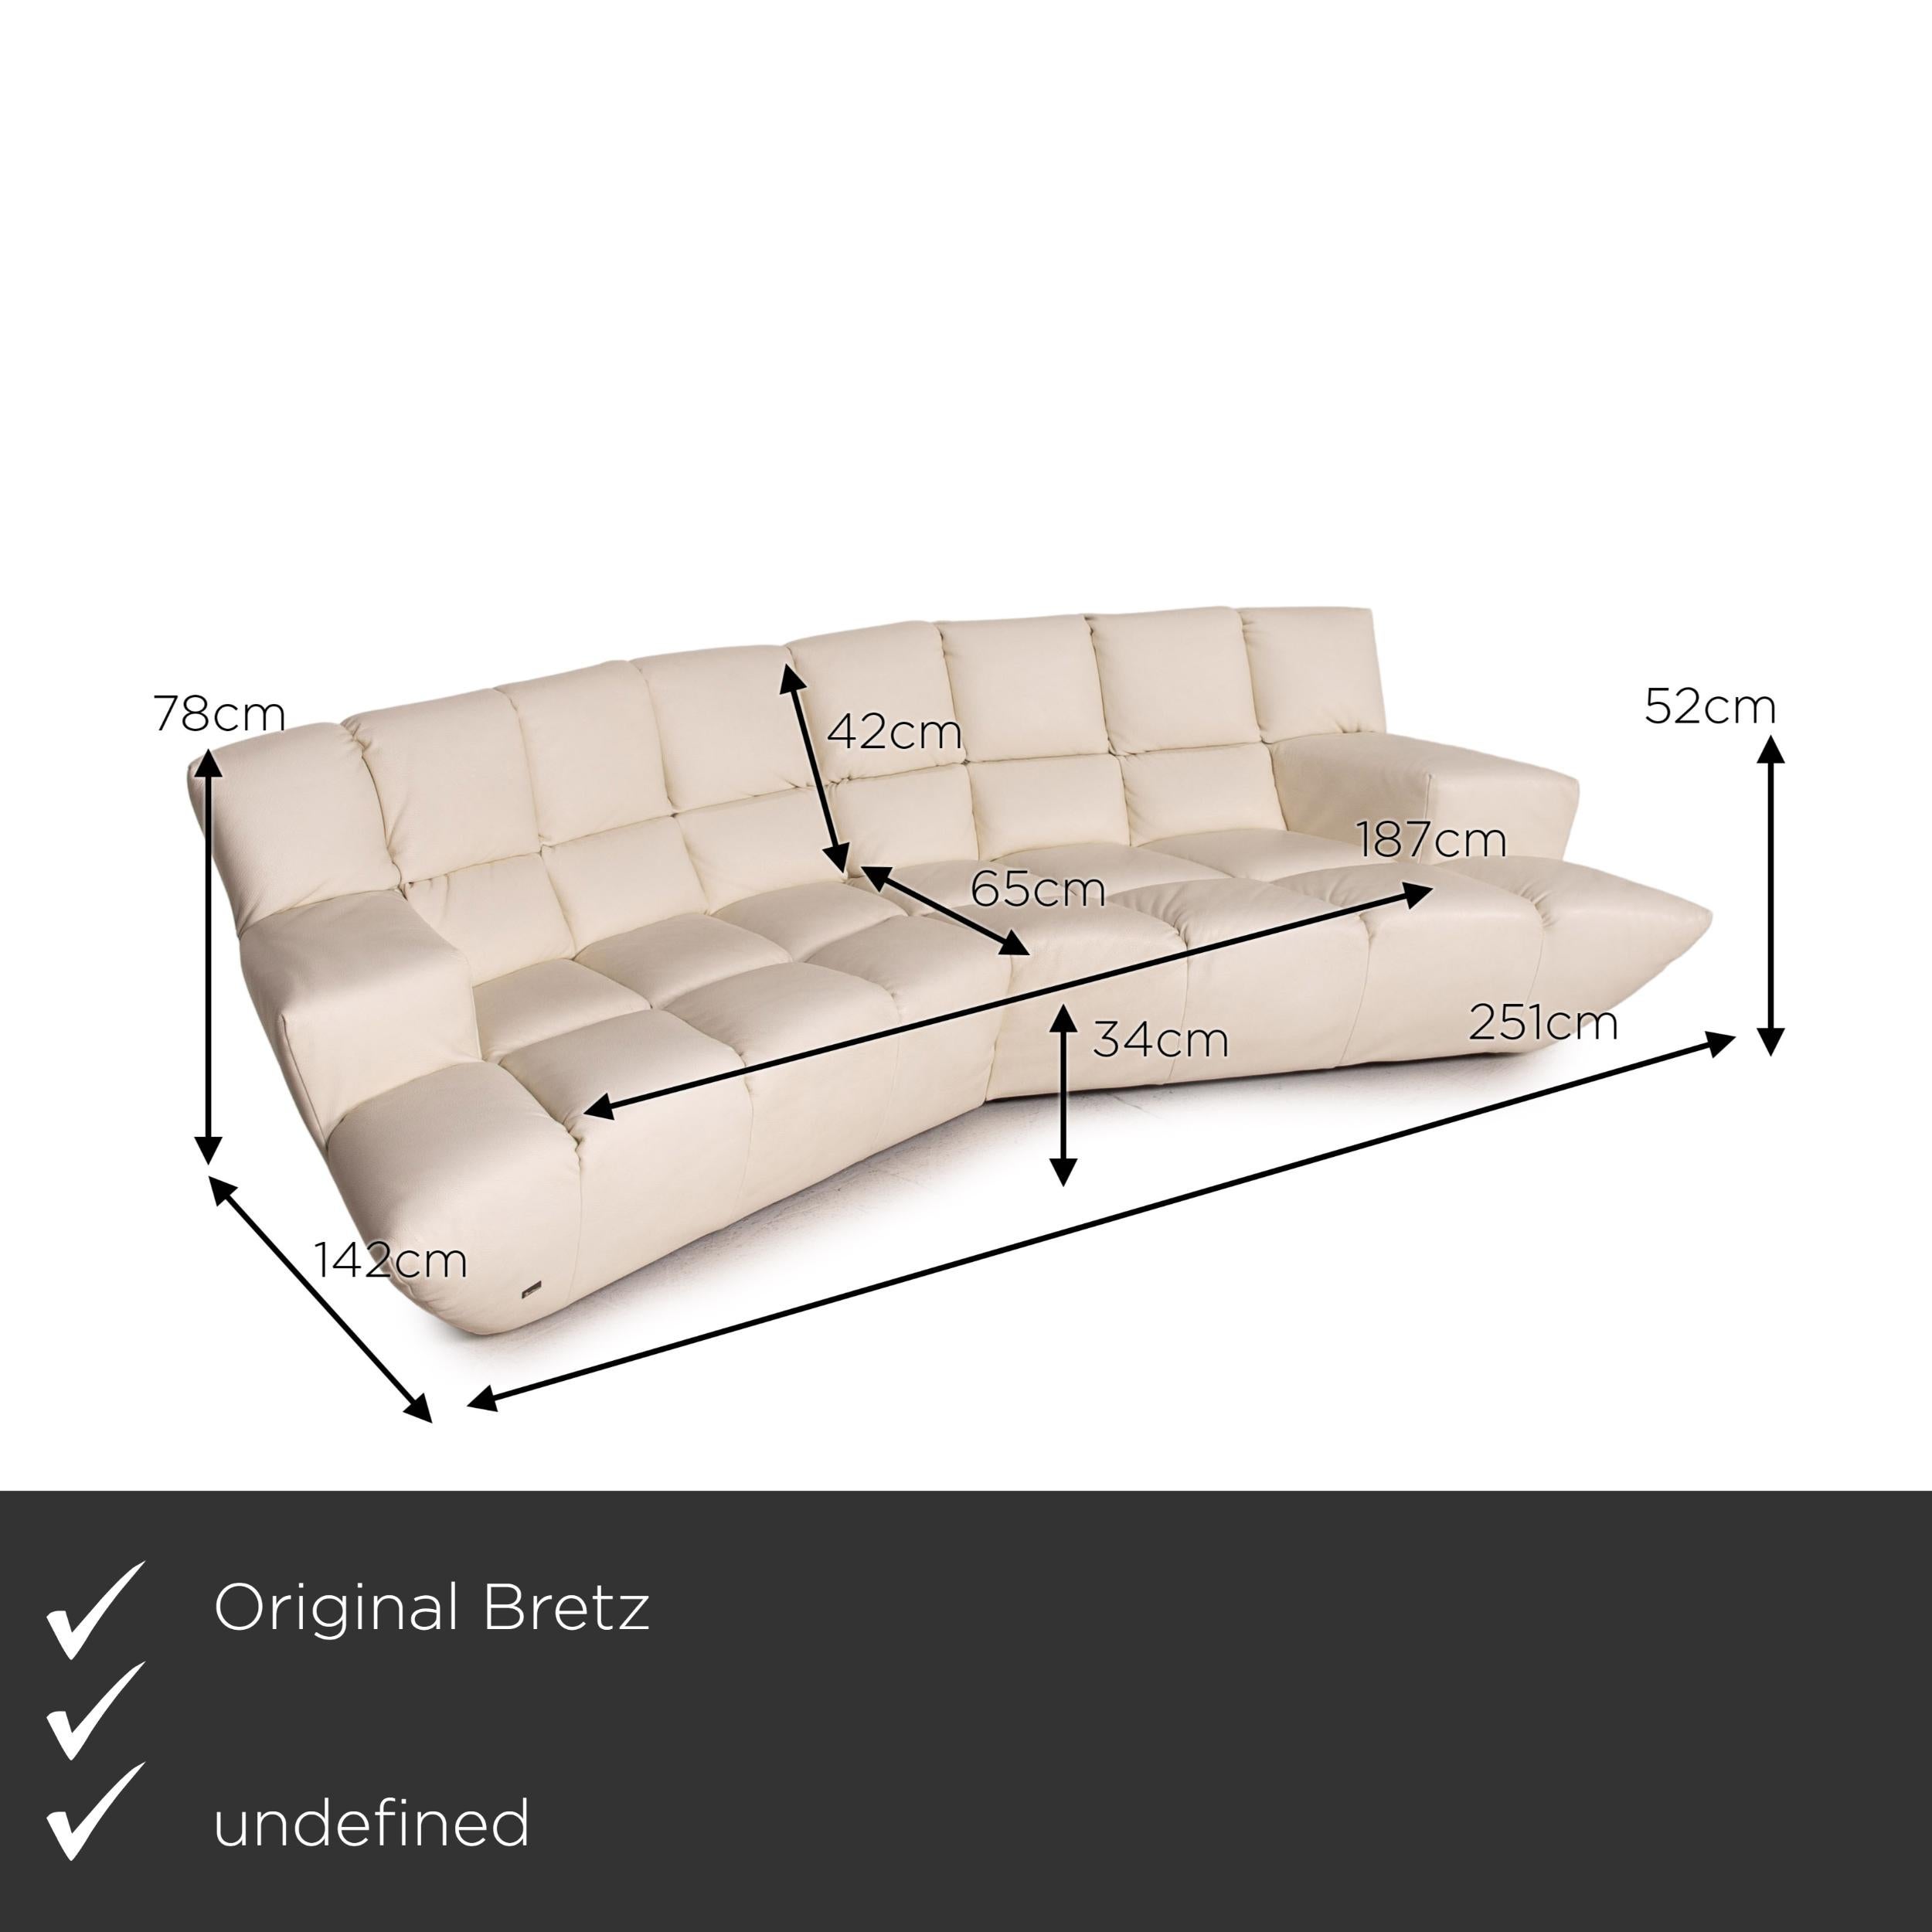 We present to you a Bretz Cloud 7 leather sofa set cream 1x corner sofa 1x armchair.
  
 

 Product measurements in centimeters:
 

 depth: 142
 width: 251
 height: 78
 seat height: 34
 rest height: 52
 seat depth: 65
 seat width: 187
